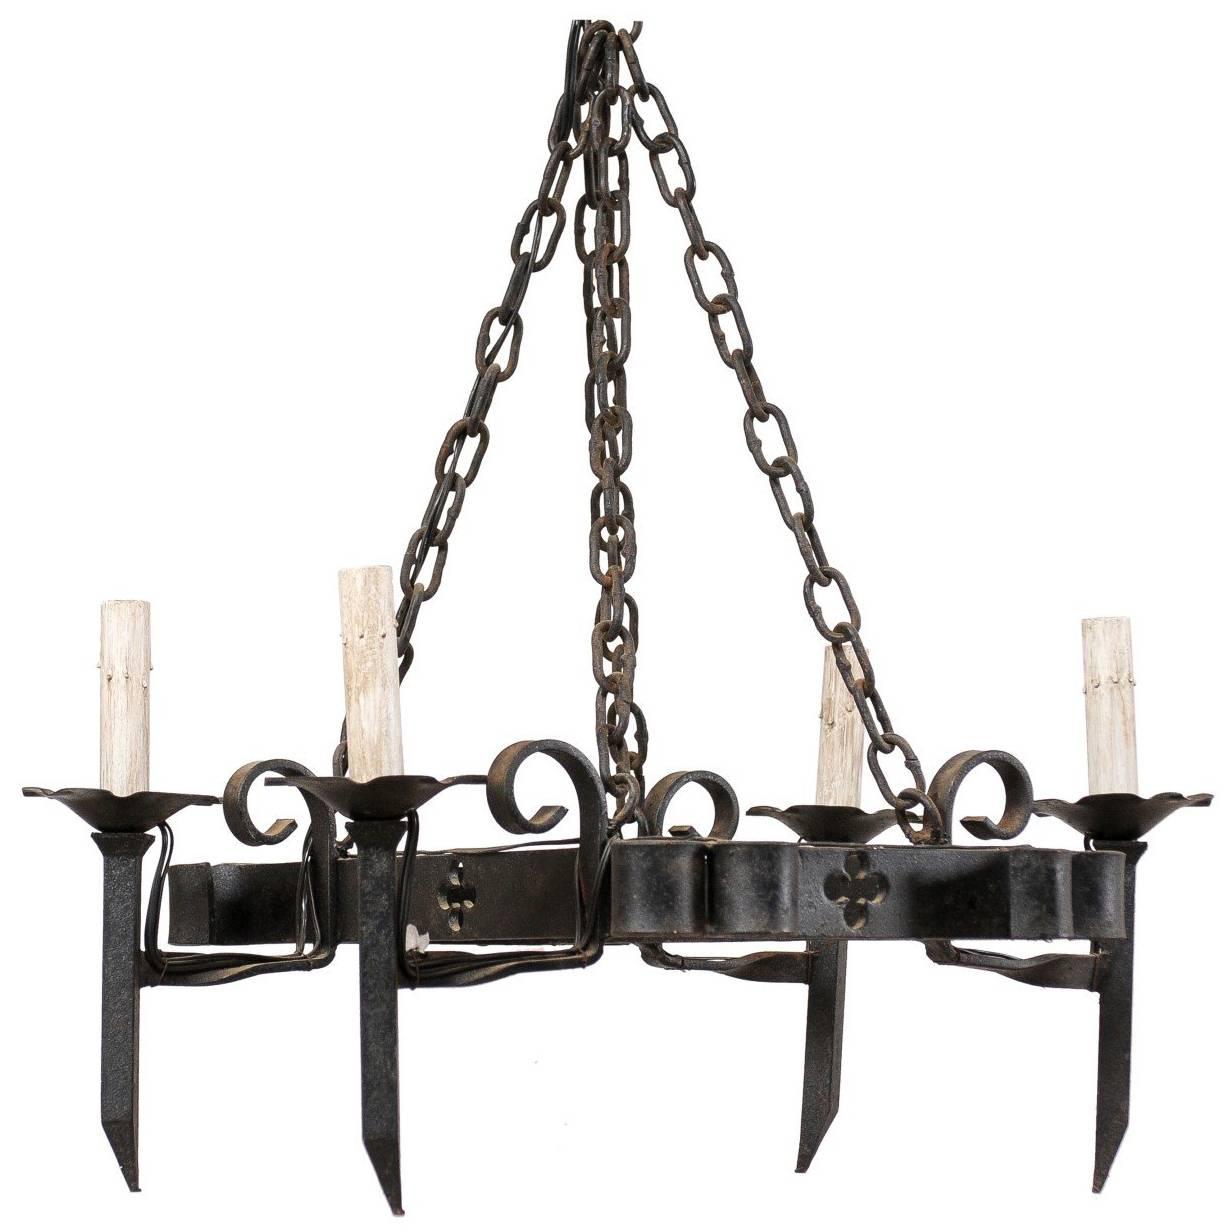 Vintage French Forged Iron Black Chandelier with Pierced Clover Motif Pattern